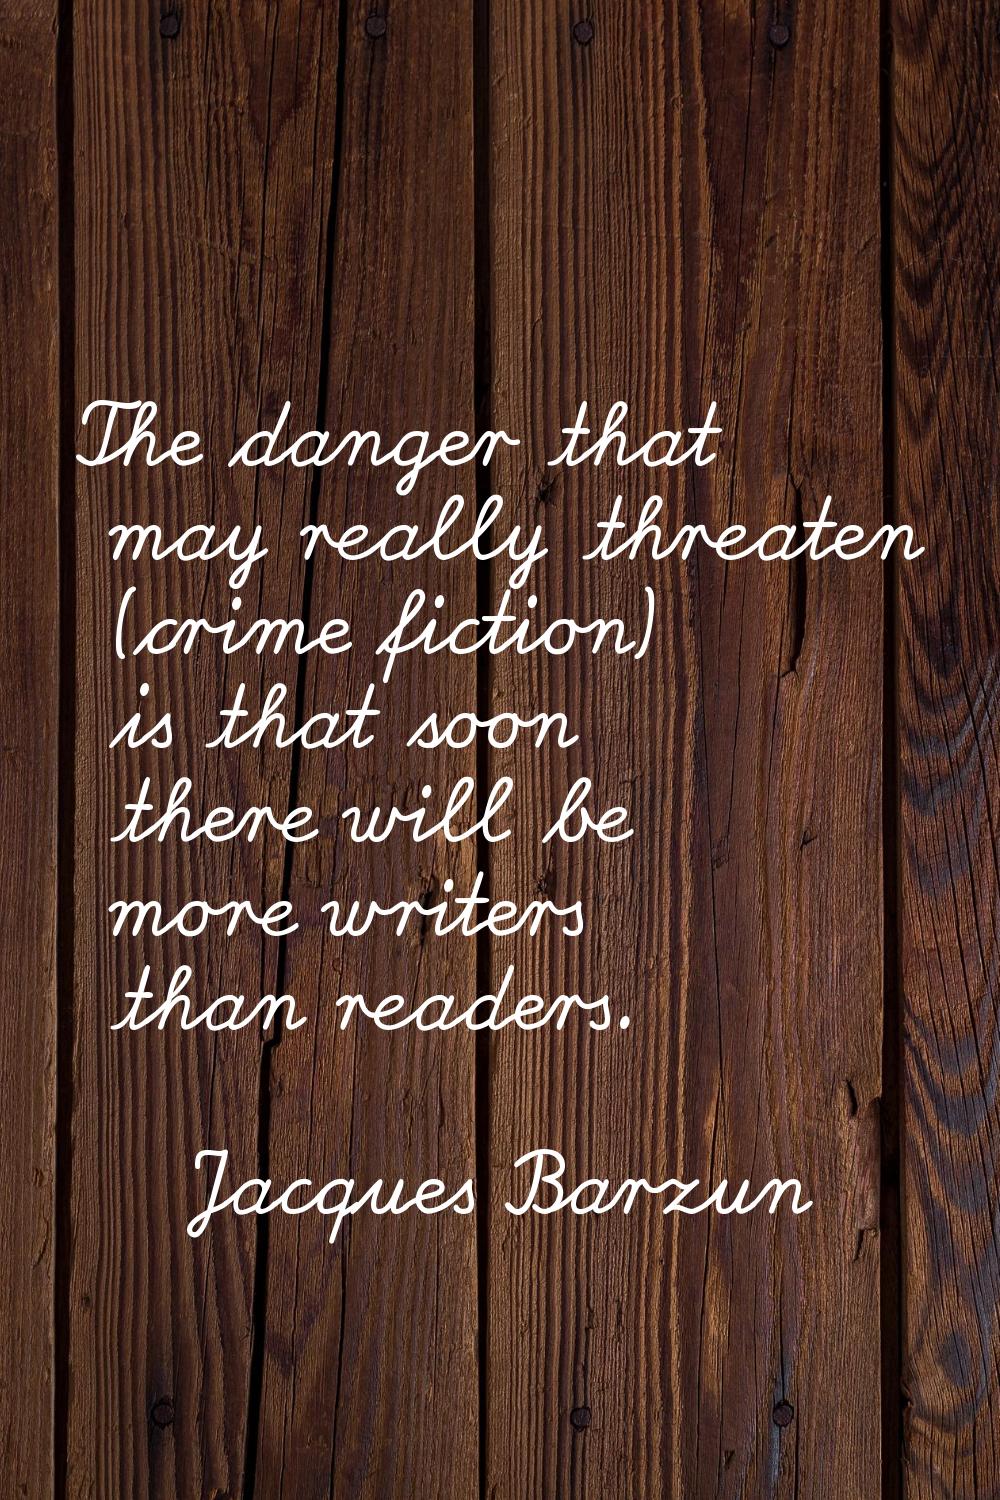 The danger that may really threaten (crime fiction) is that soon there will be more writers than re